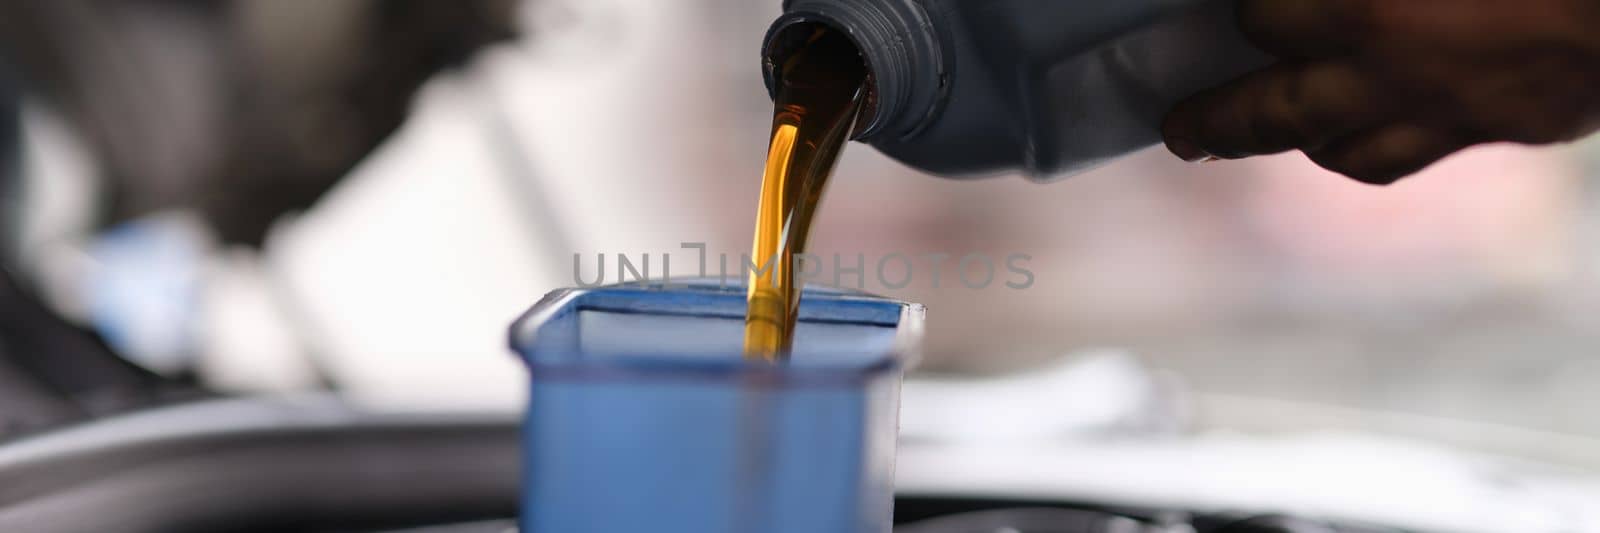 Mechanic pouring engine oil into engine in car service. Services and auto repair shop business concept